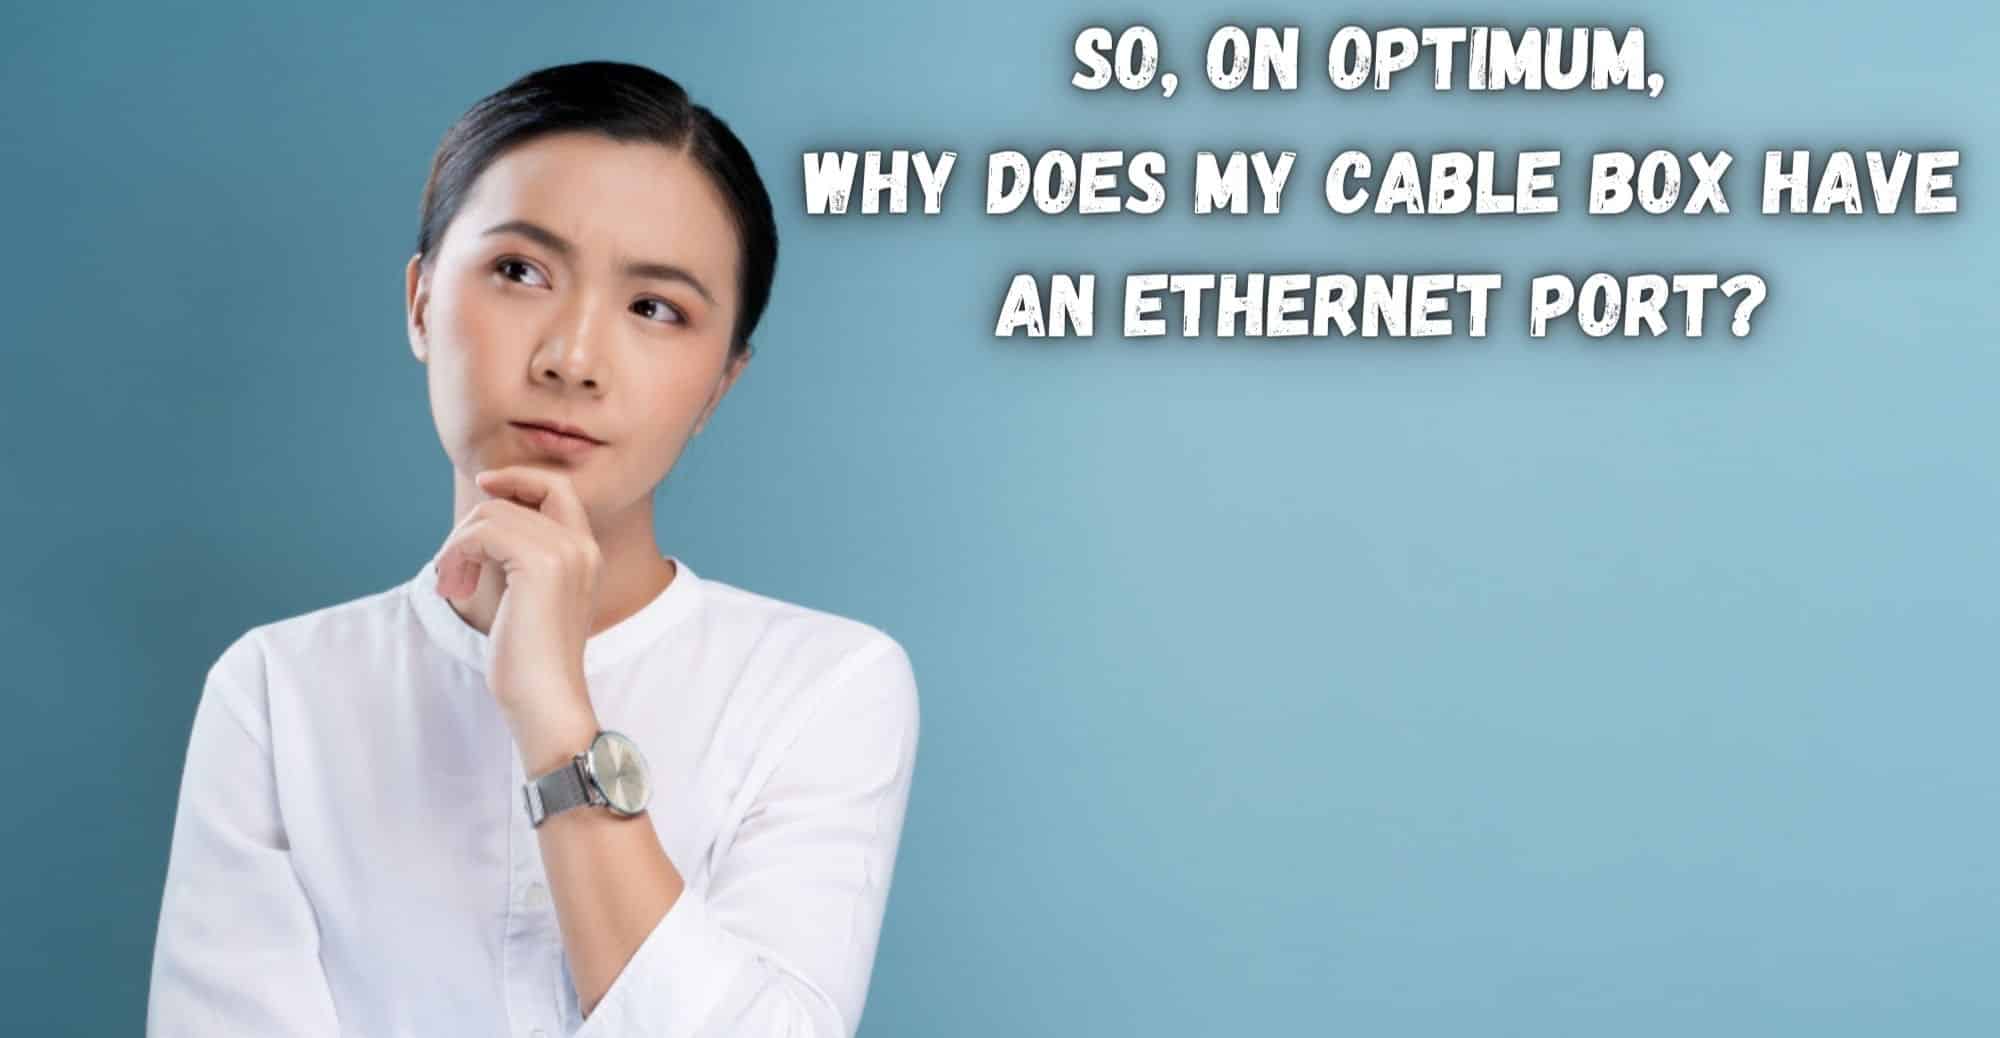 So on Optimum Why Does My Cable Box Have An Ethernet Port